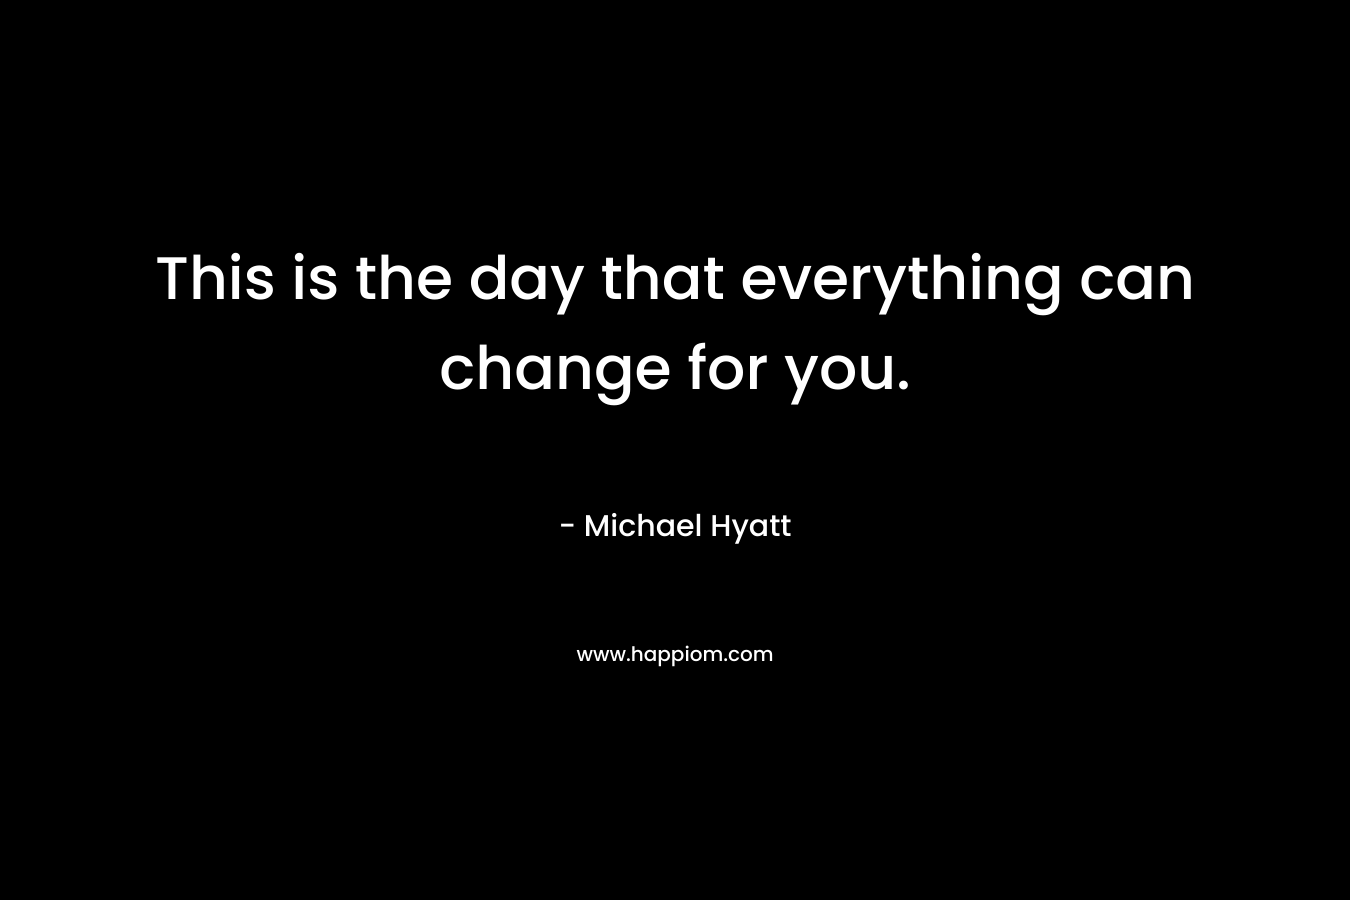 This is the day that everything can change for you.